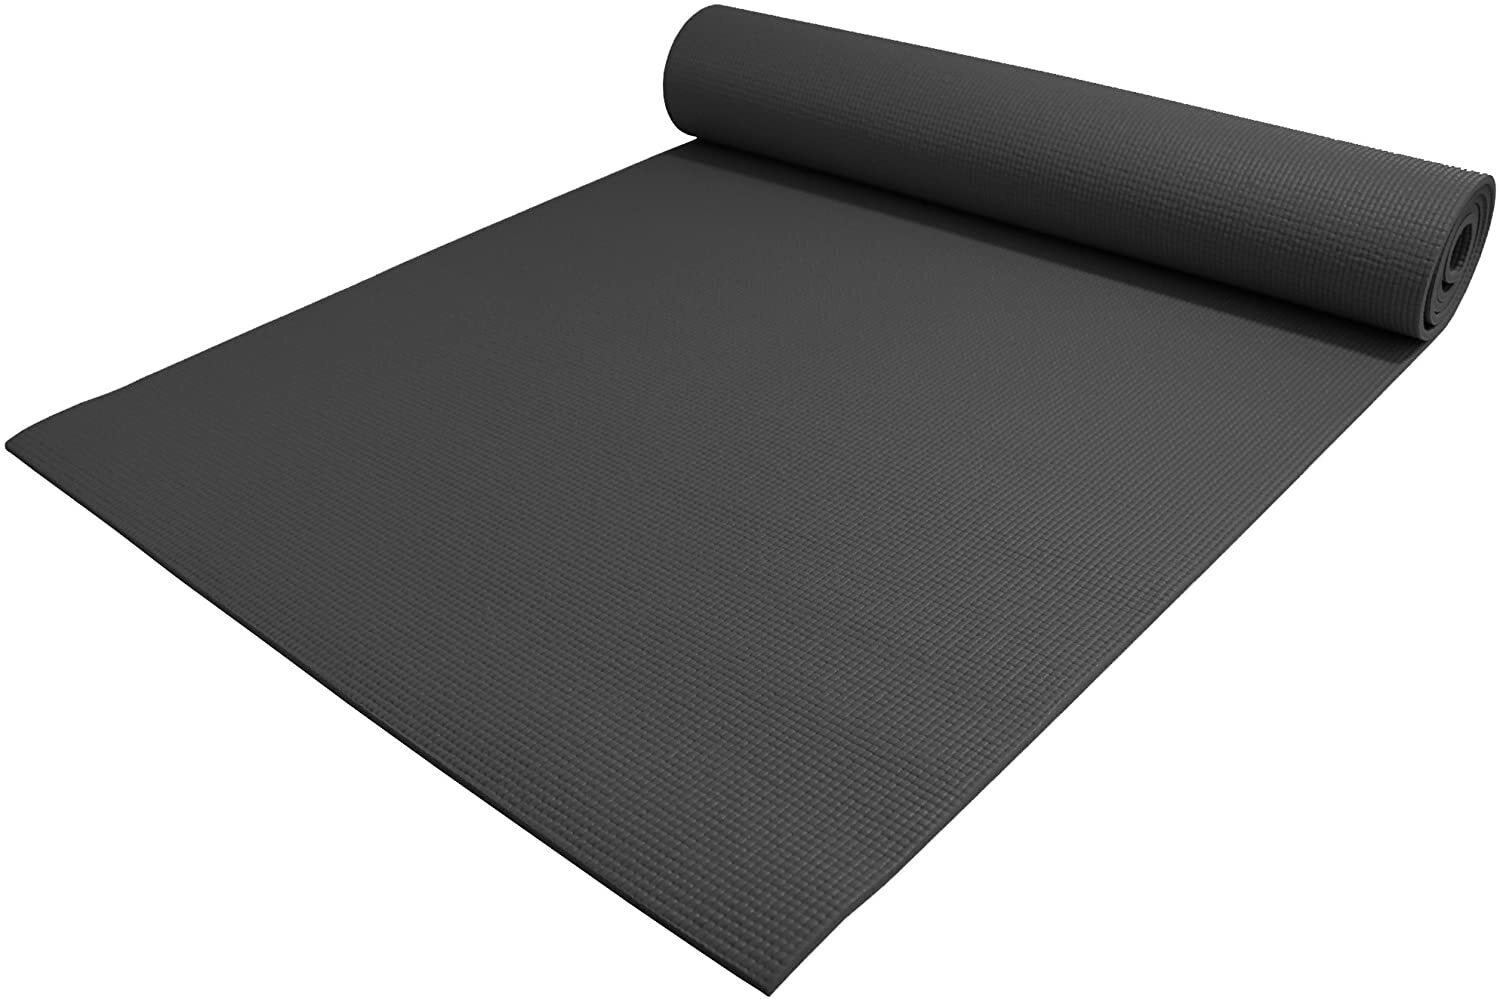 YogaAccessories 1/4" Thick Deluxe Yoga Mat